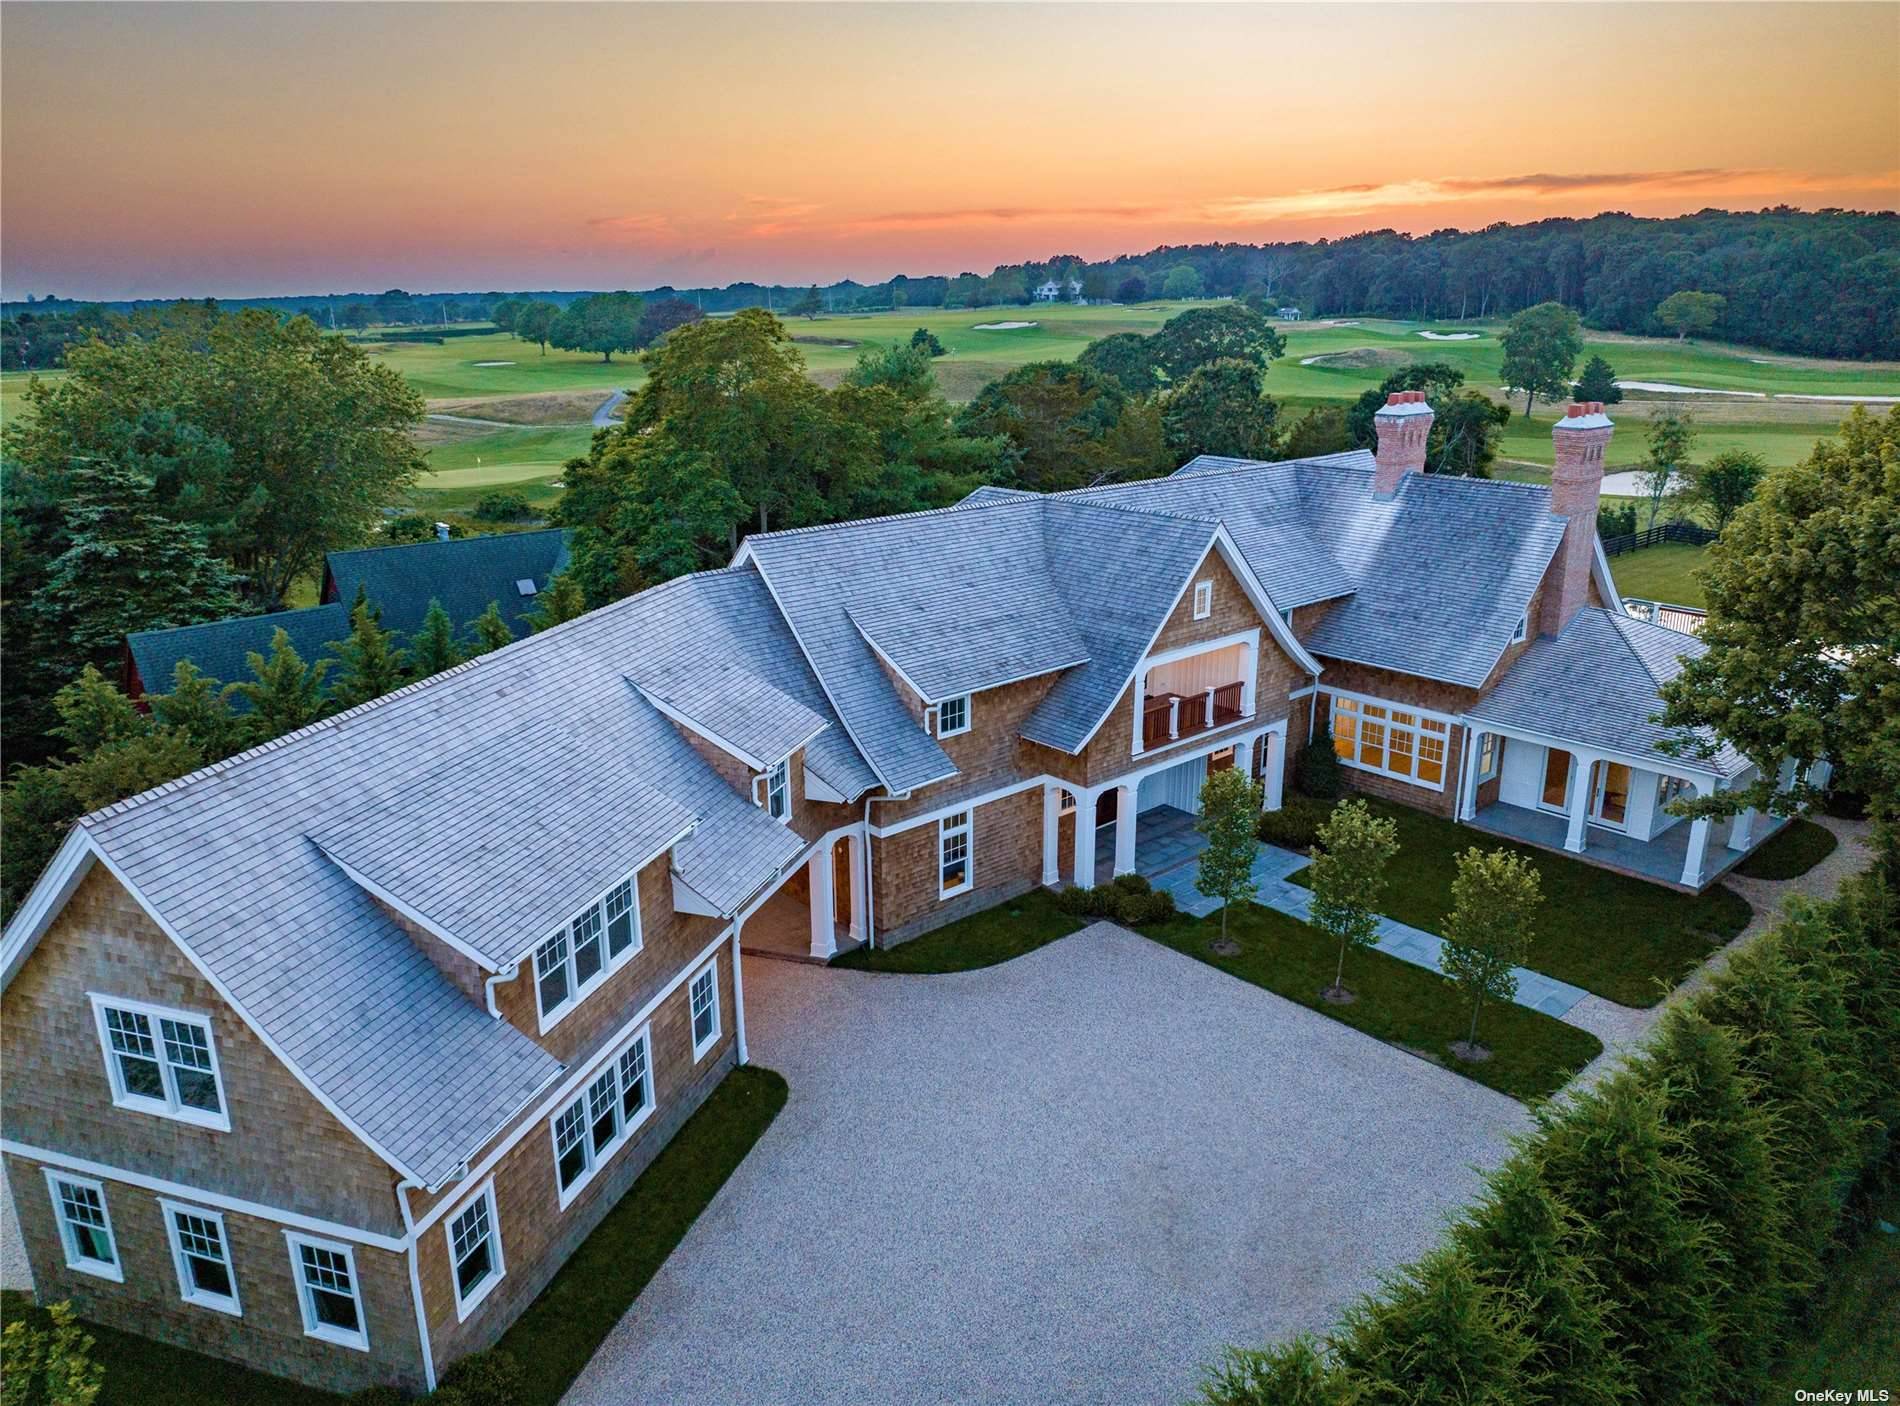 Located in the heart of Amagansett, this stunning new construction estate is sited on a 1.